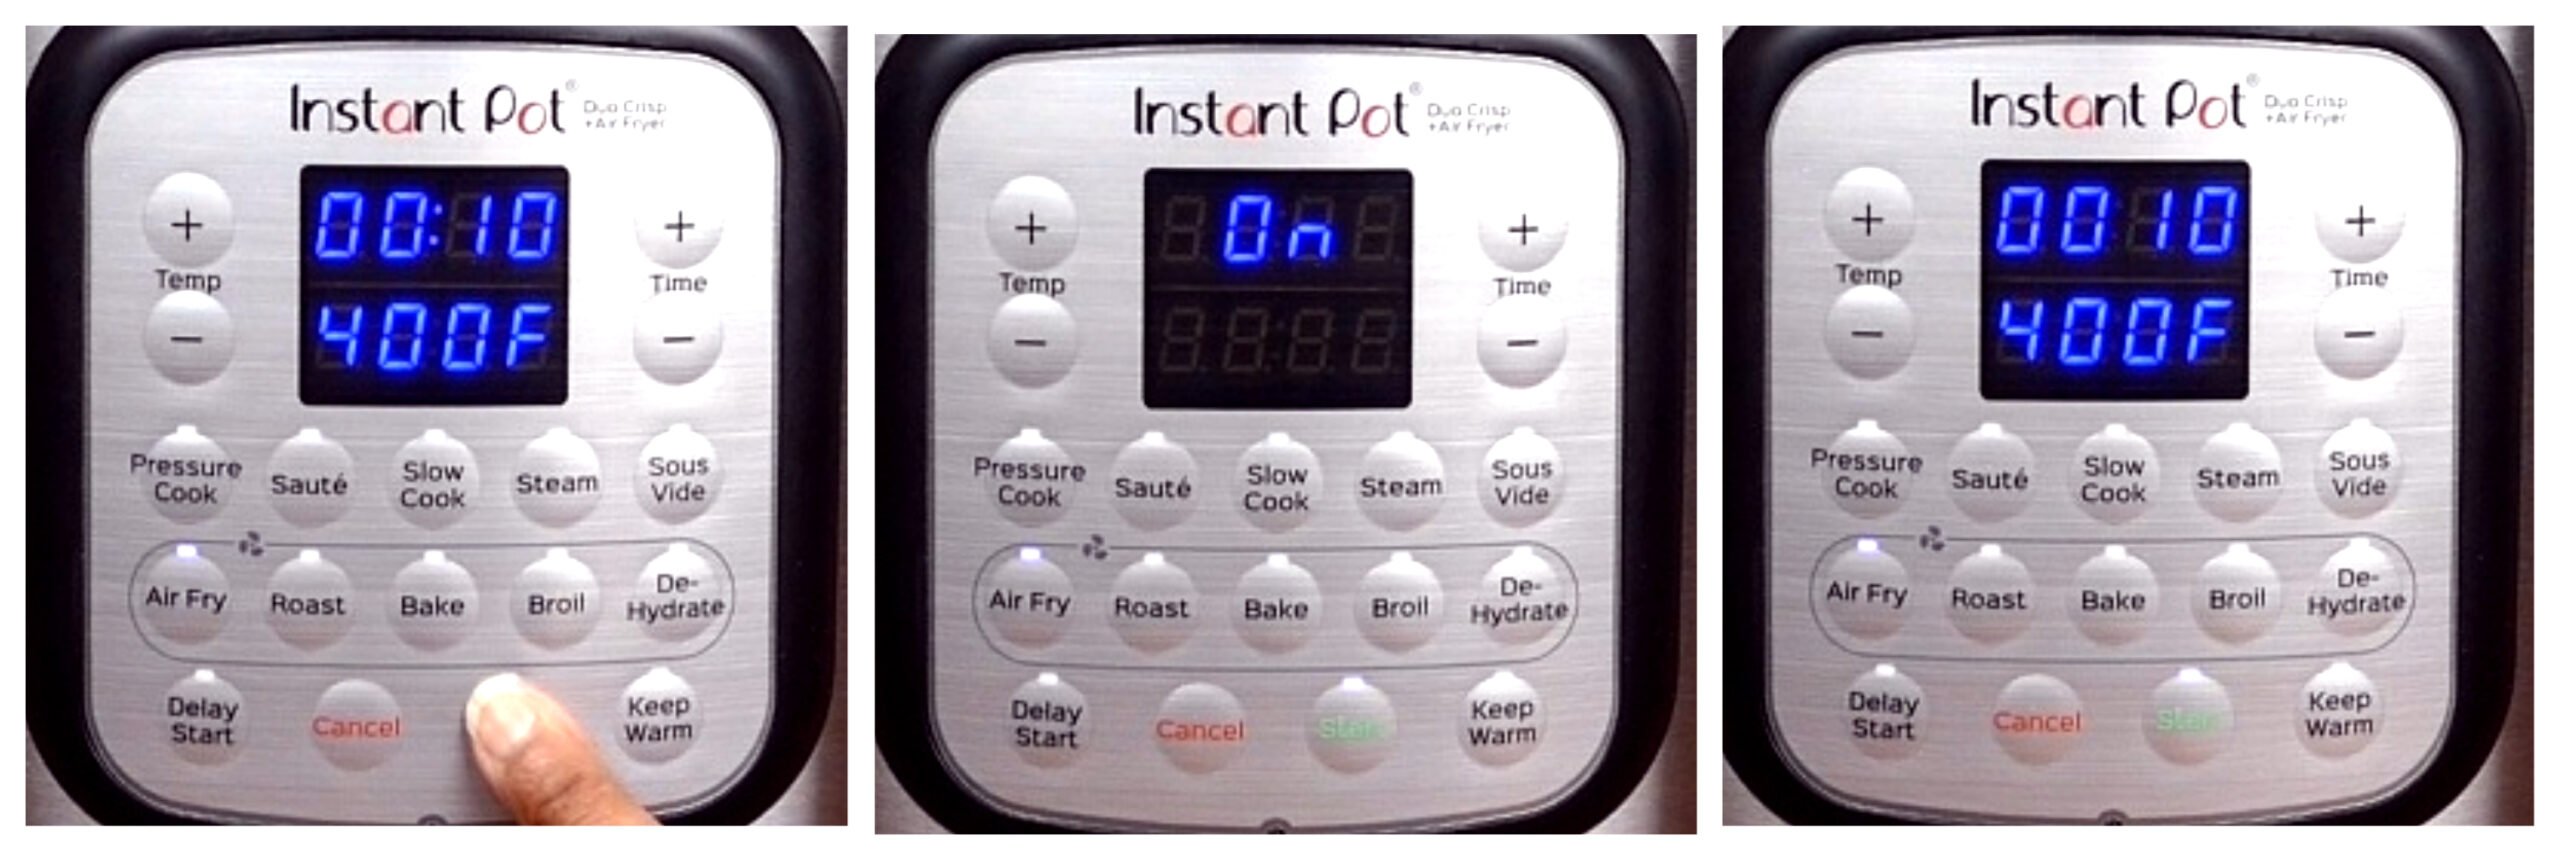 Instant Pot Duo Crisp Air Fry Collage - press start, display says on, display says 10 minutes